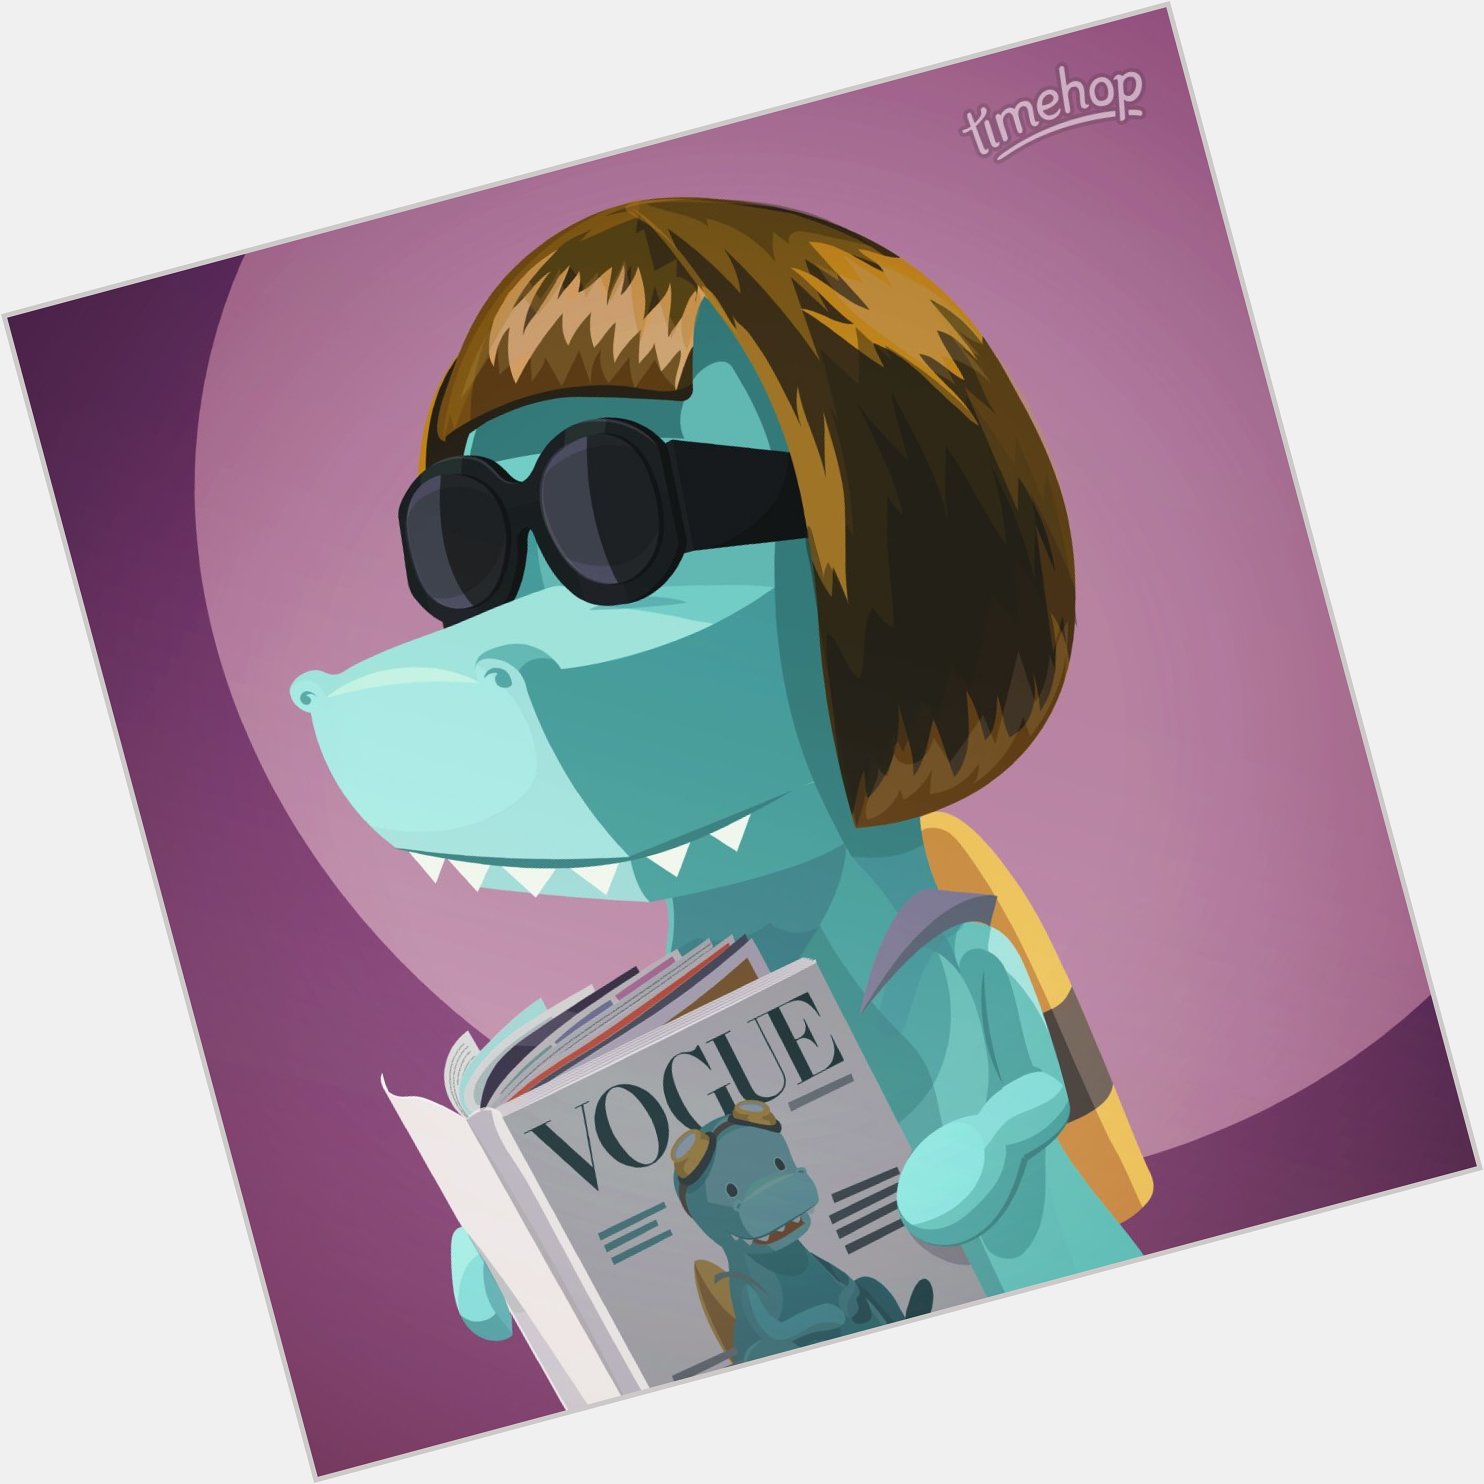 Happy bday anna wintour! plz look out for my request to be the first dinosaur on the cover of 